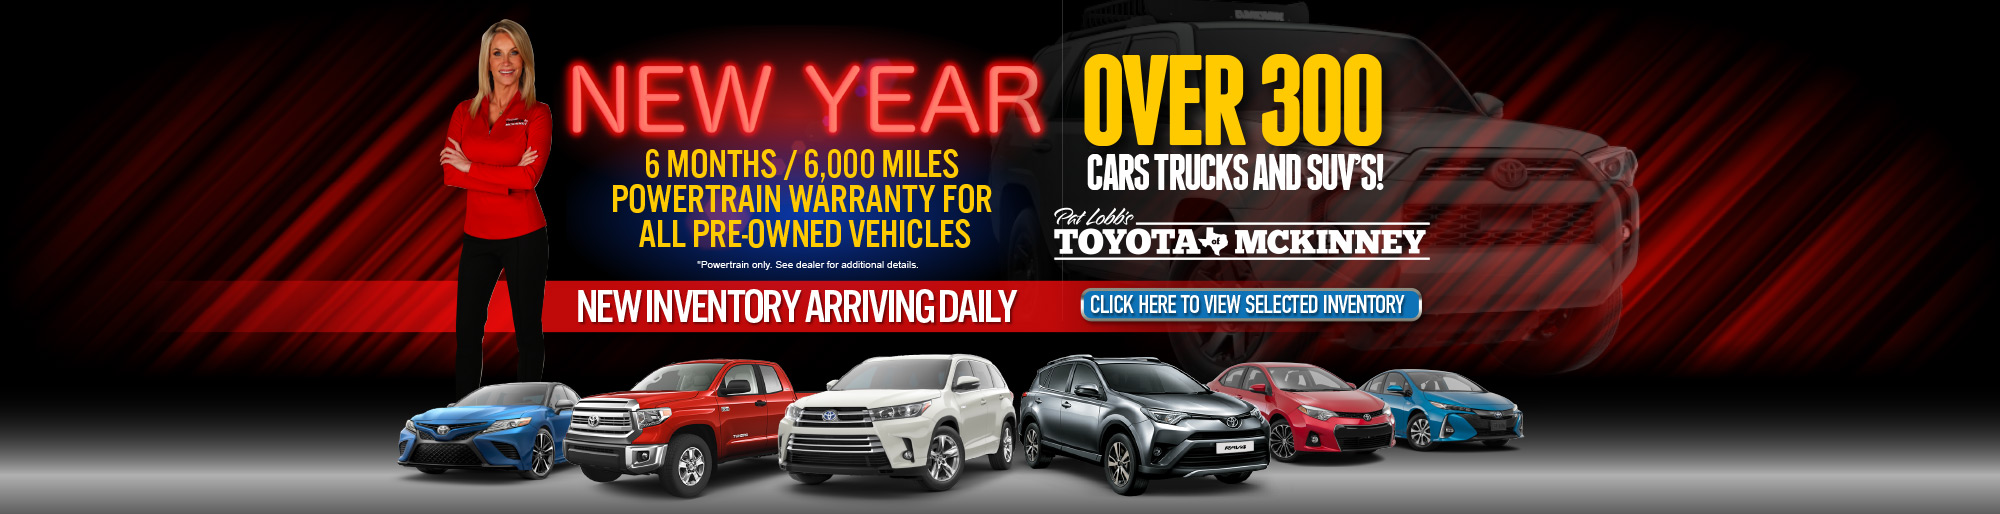 TOYOTATHON IS ON. PRE OWNED CERTIFIED TOYOTAS MARKED DOWN - NO PAYMENTS UNTIL SPRING 2022 - NEW INVENTORY ARRIVING DAILY - Act Now